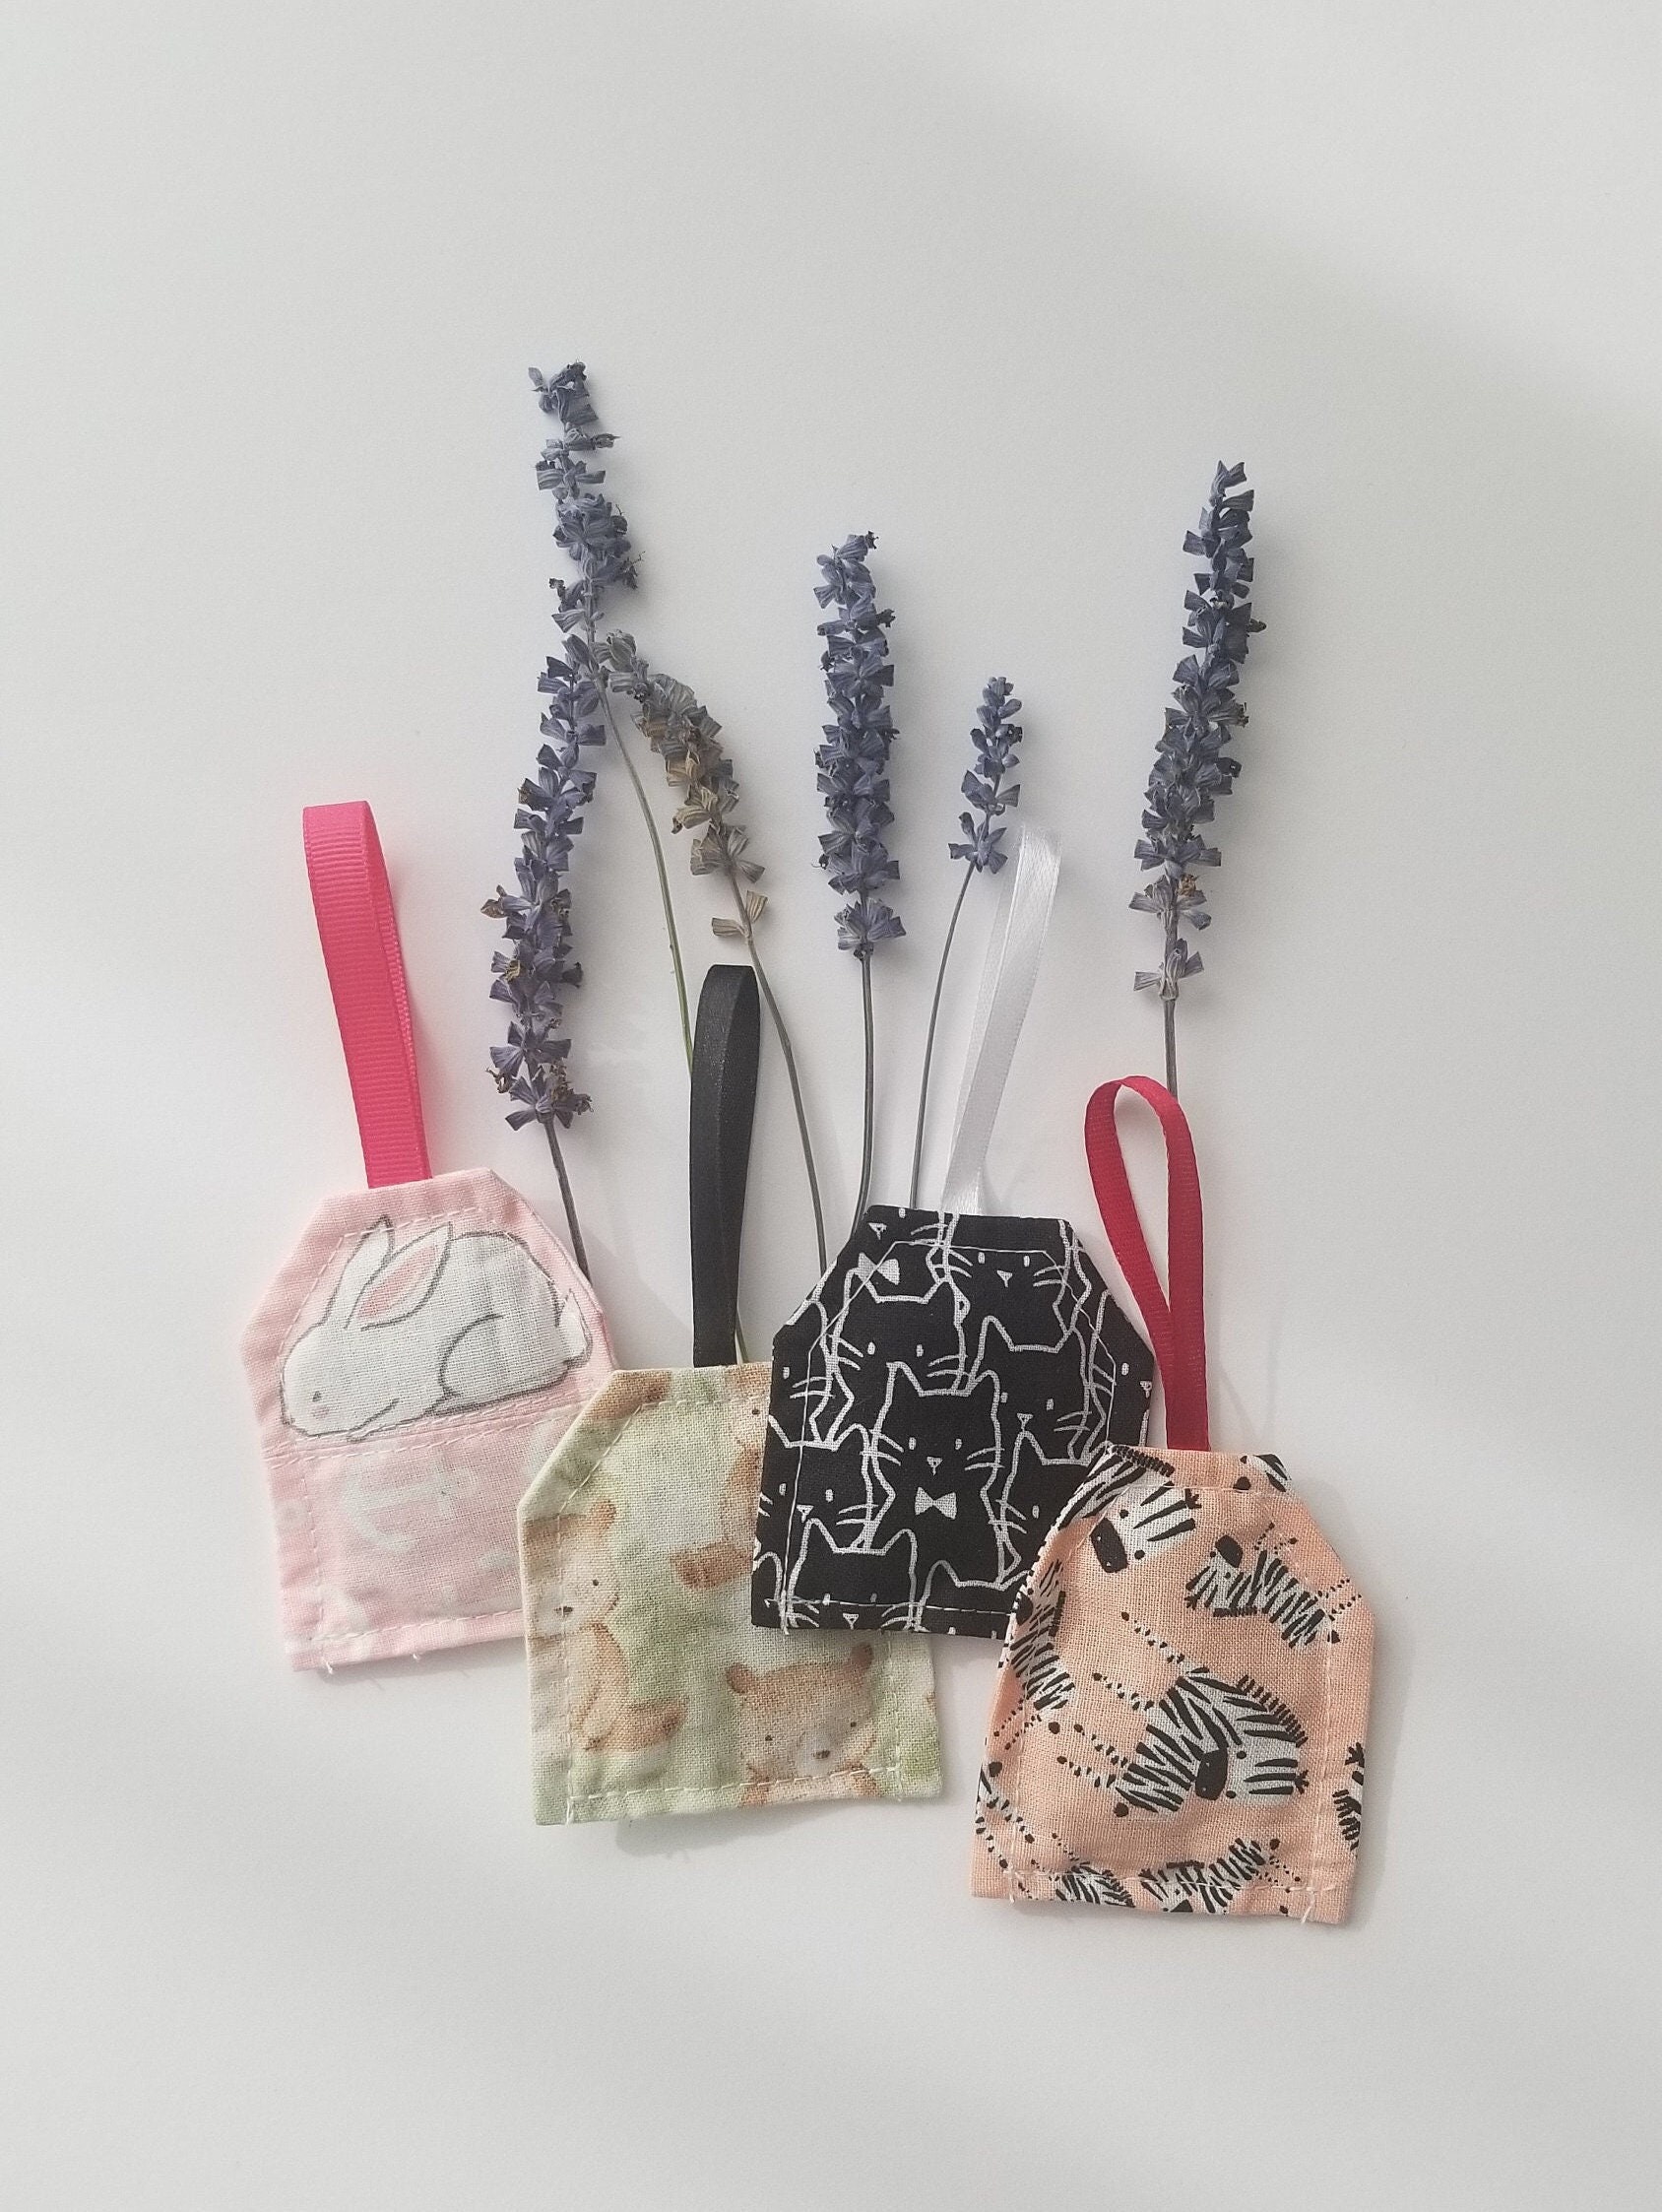 6 Sachets for Drawers, Cedar lavender Sachets, Non-toxic, Eco-friendly  Sachets, Natural Moth Repellent Bags, Housewarming Gift, Host Gift 